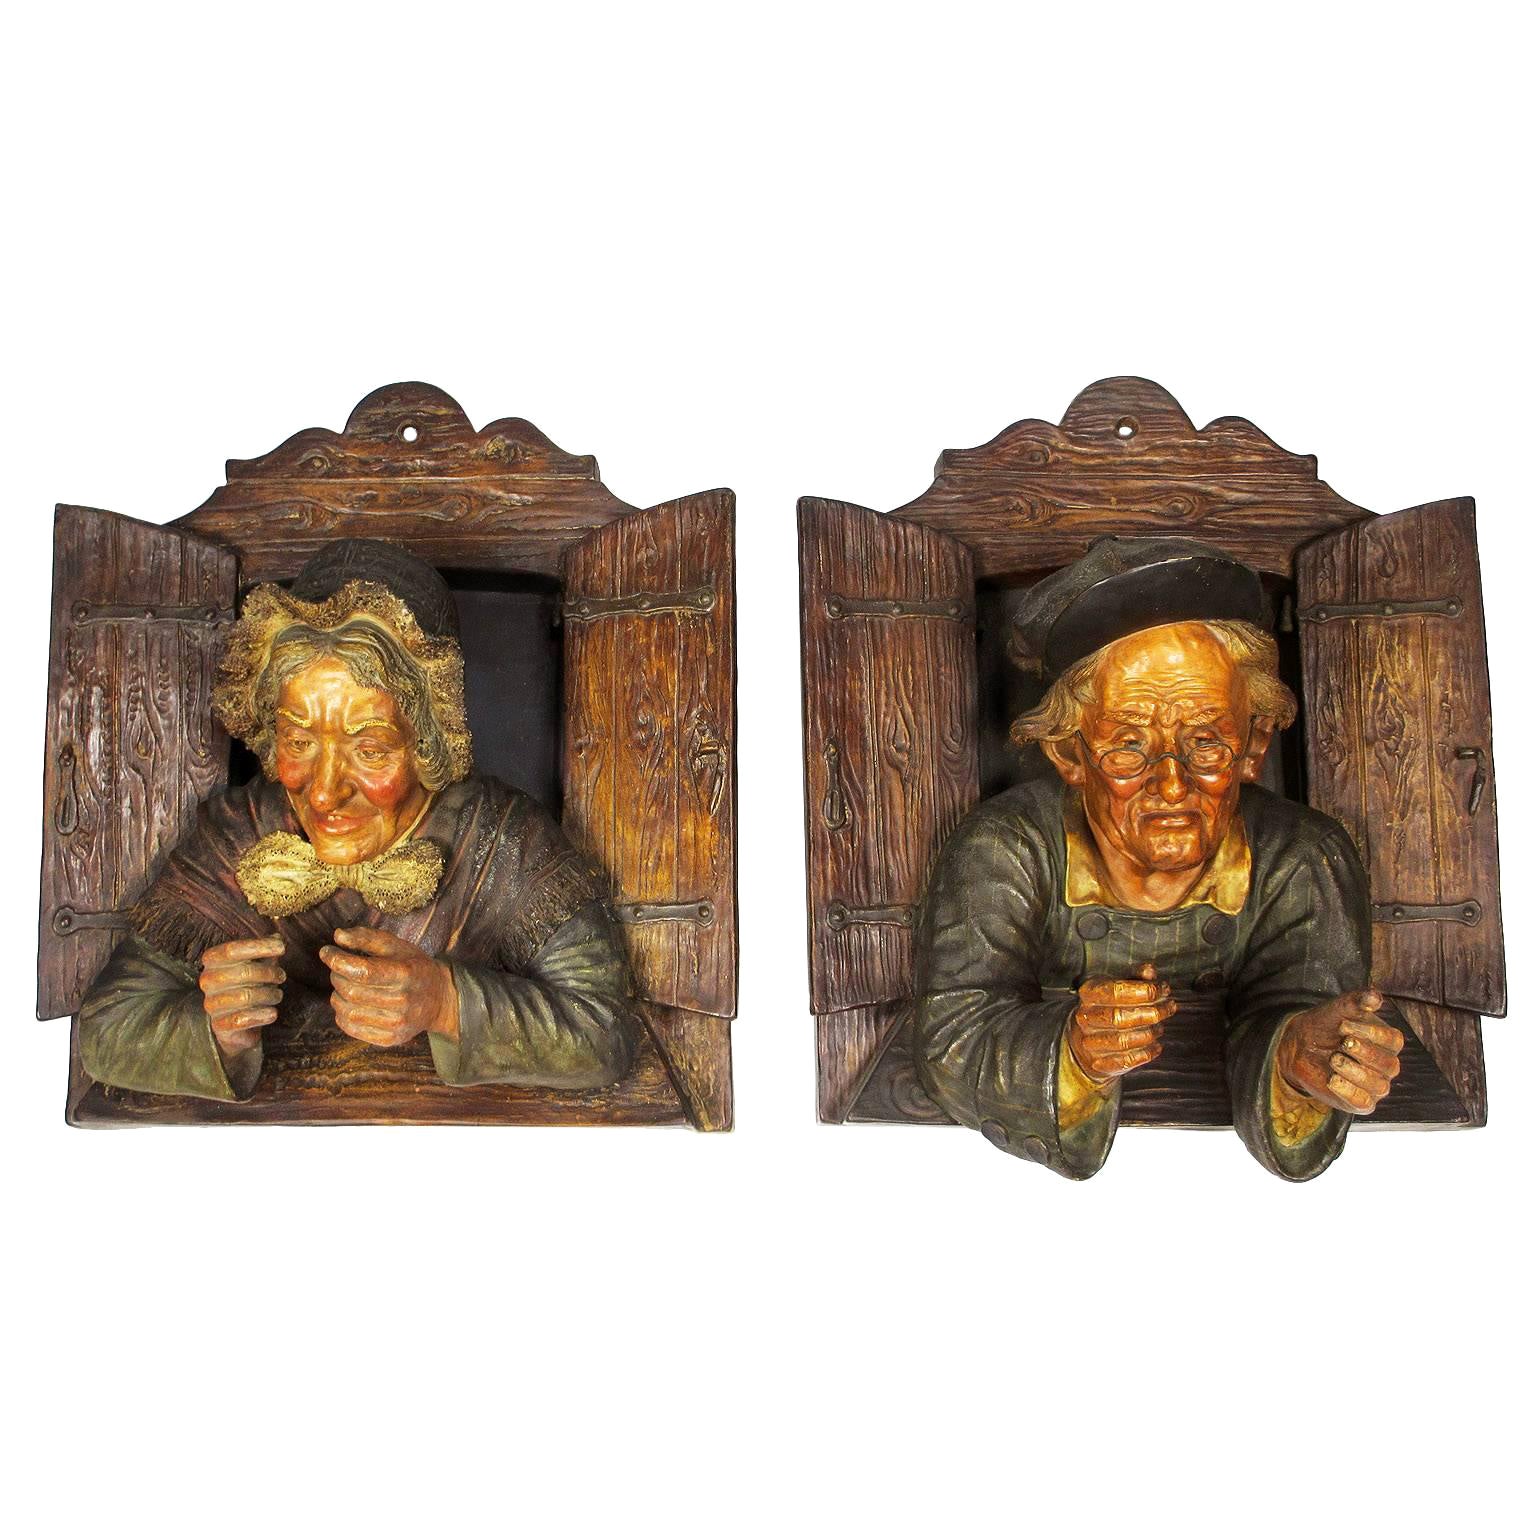 Charming Pair of Austrian 19th Century Polychromed Majolica Wall Sculptures